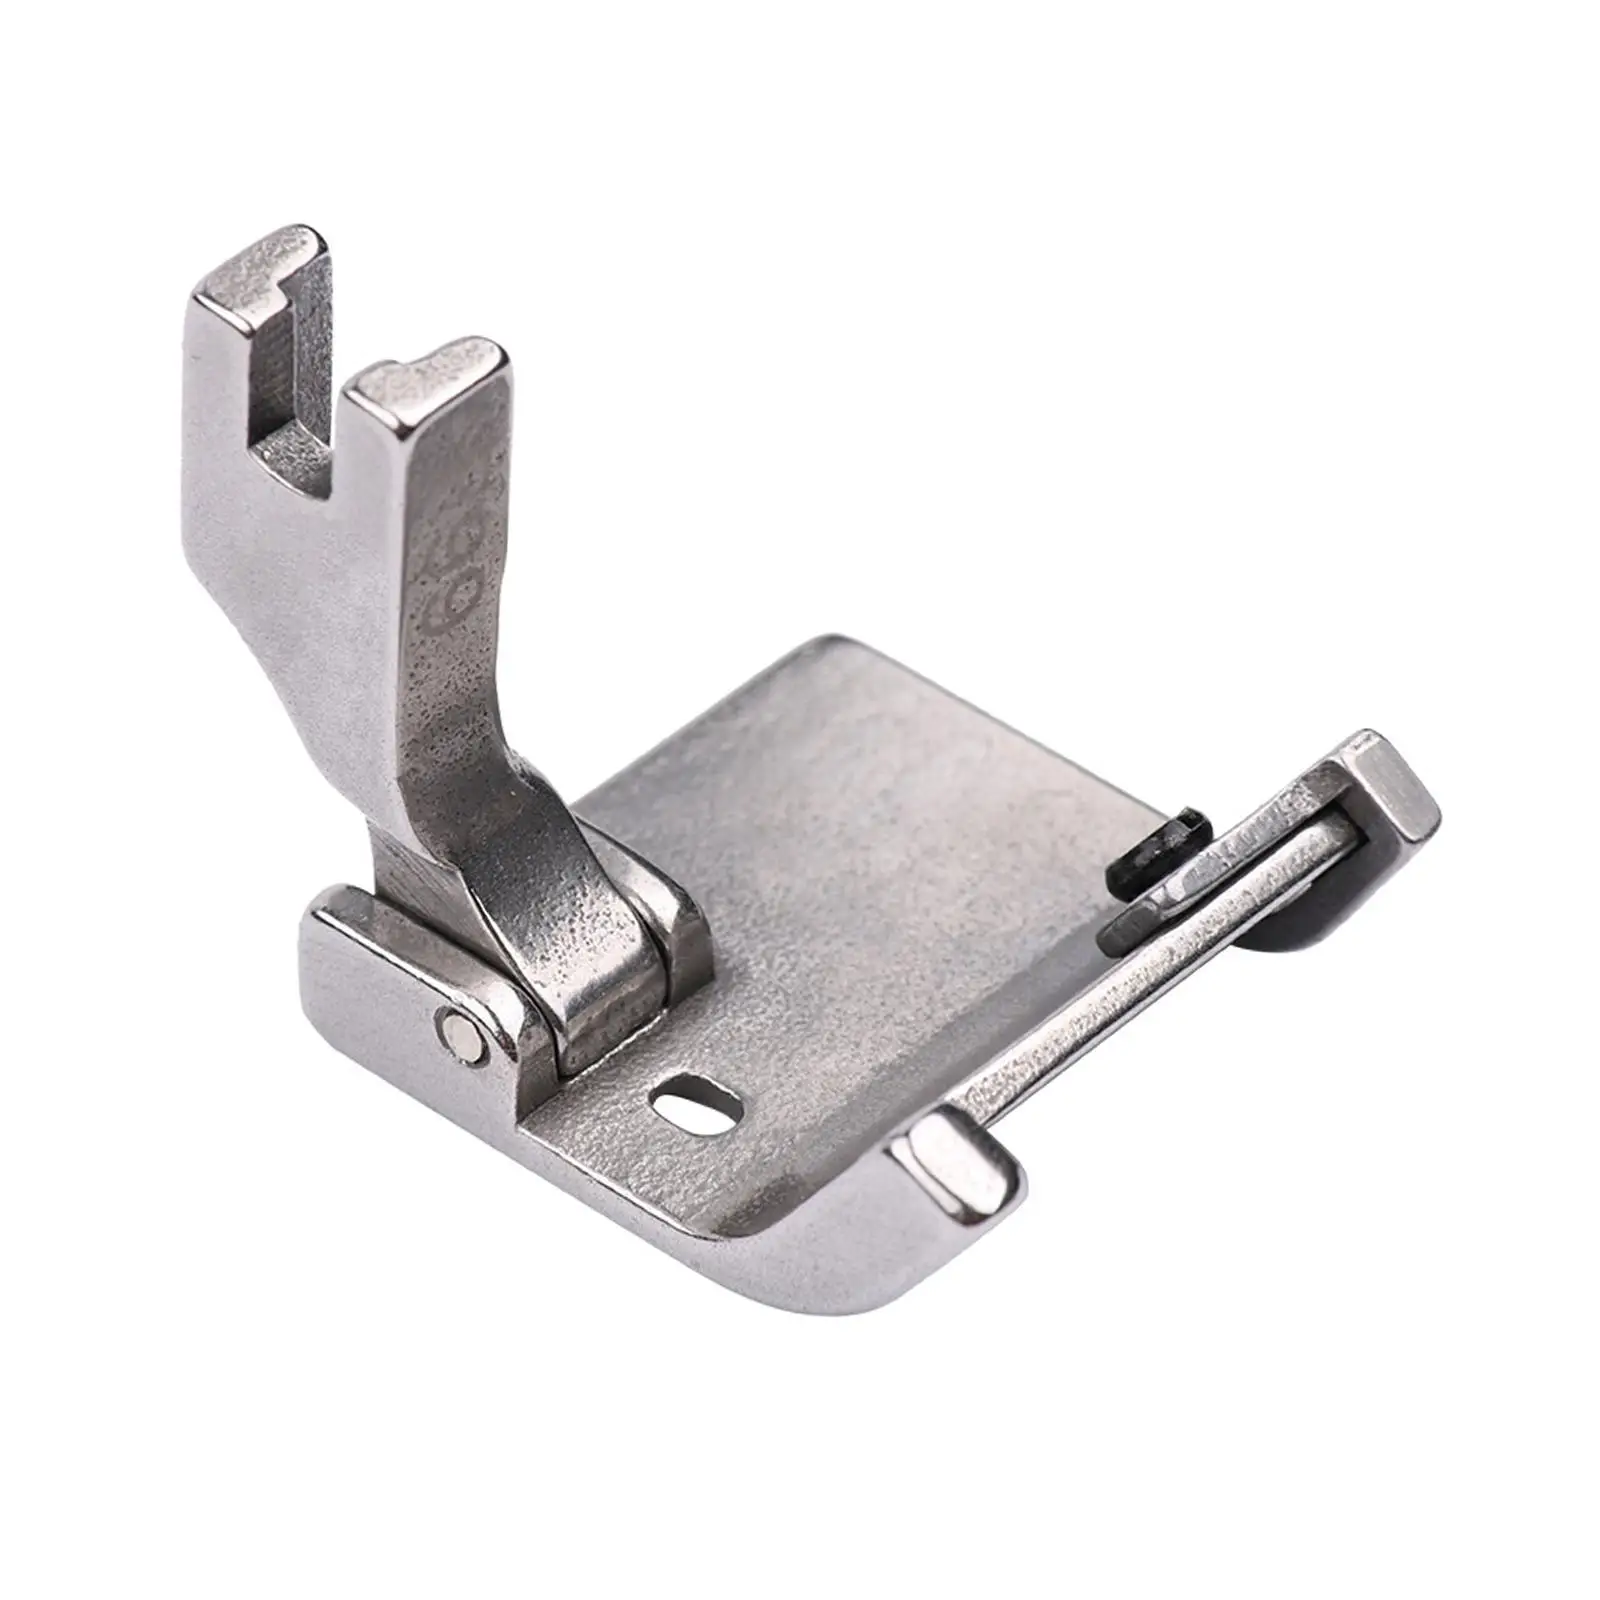 Rolled Hemming Foot Adjustable Presser Foot Rolled Hem Pressure Foot Edge Guide Foot Accessories for Darning Stitching Overlock